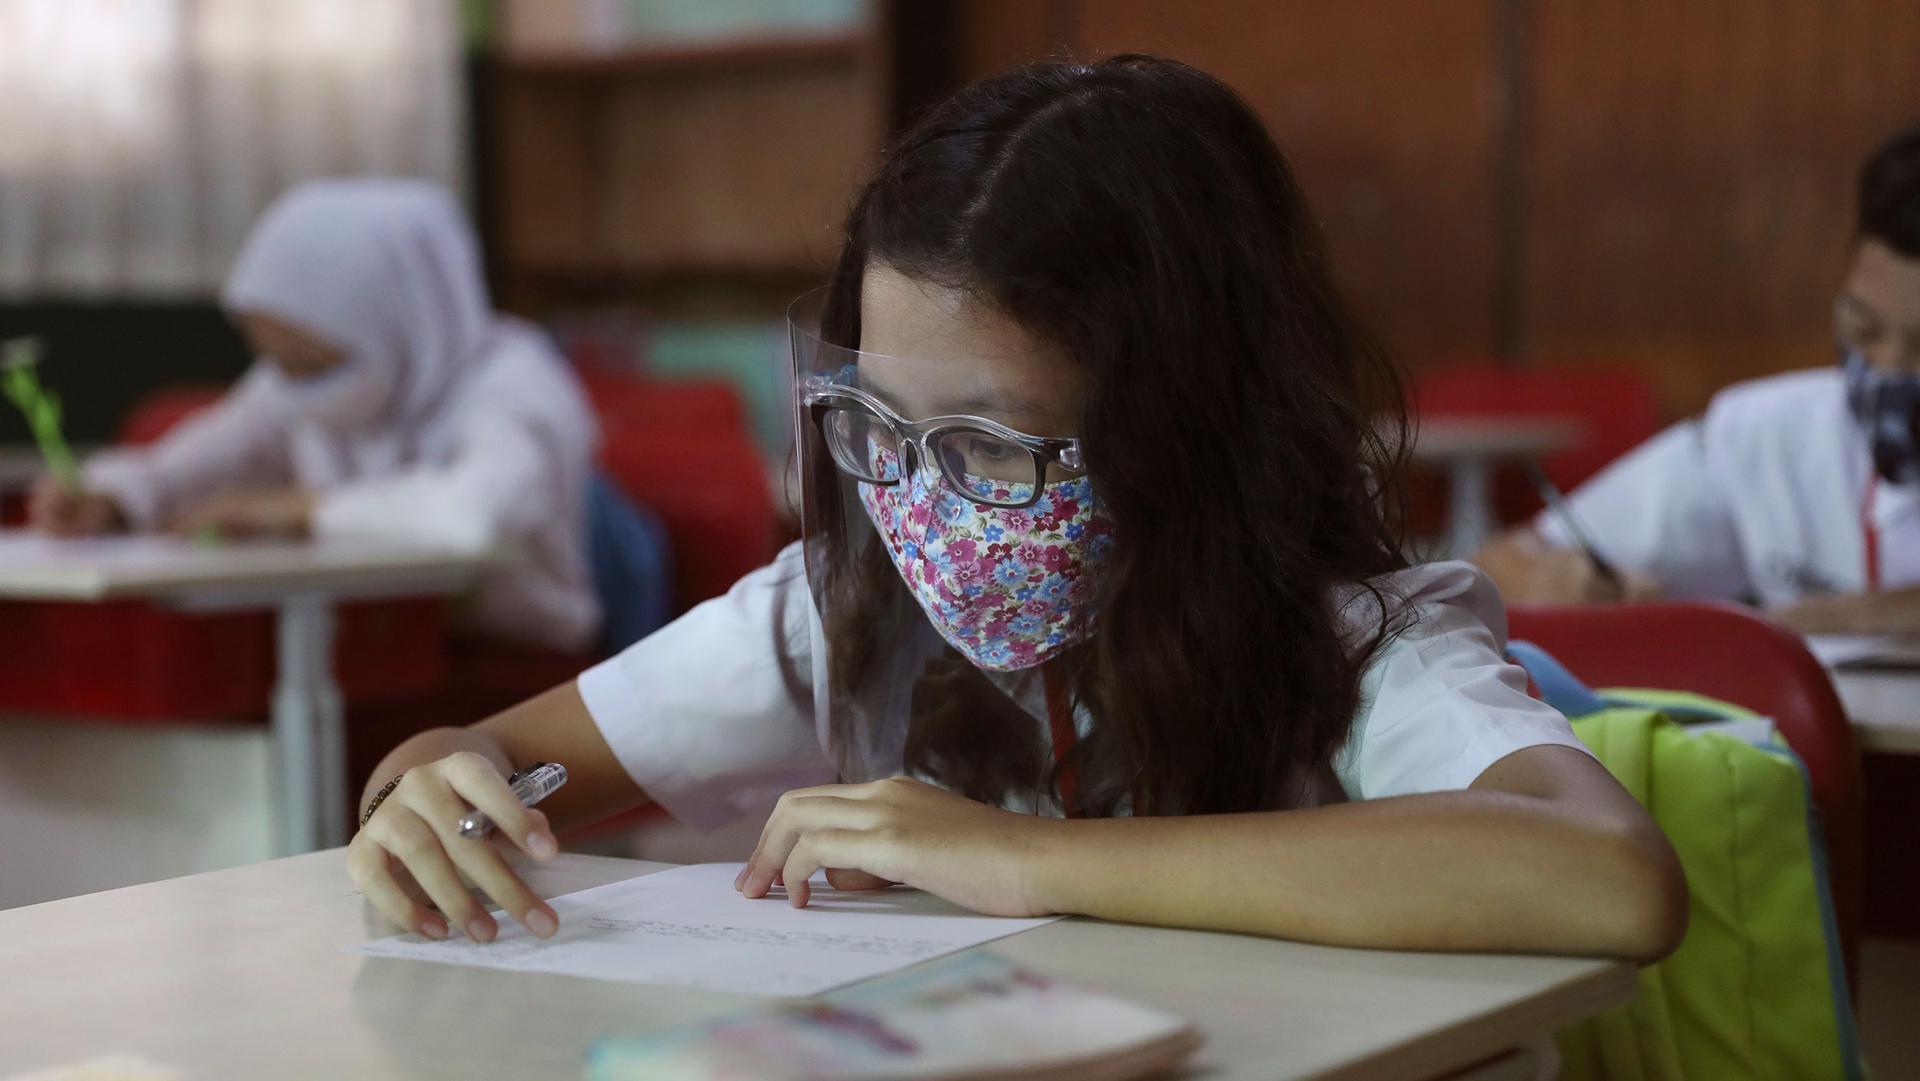 A young girl is shown sitting at a classroom desk wearing a protective face mask and plastic face guard while holding a pen.